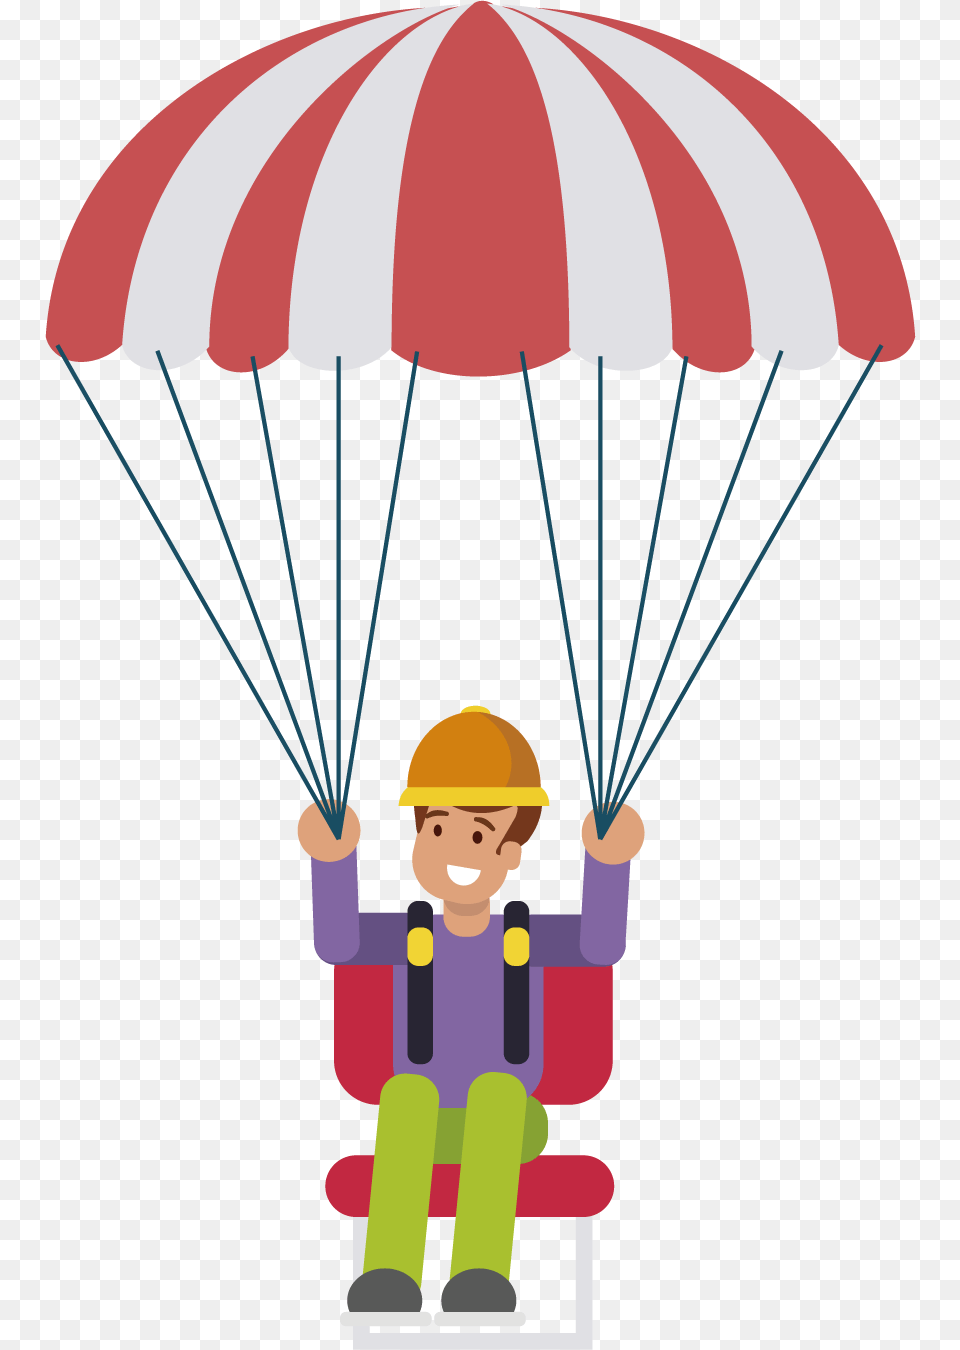 About Cartoon, Parachute, Baby, Person, Face Png